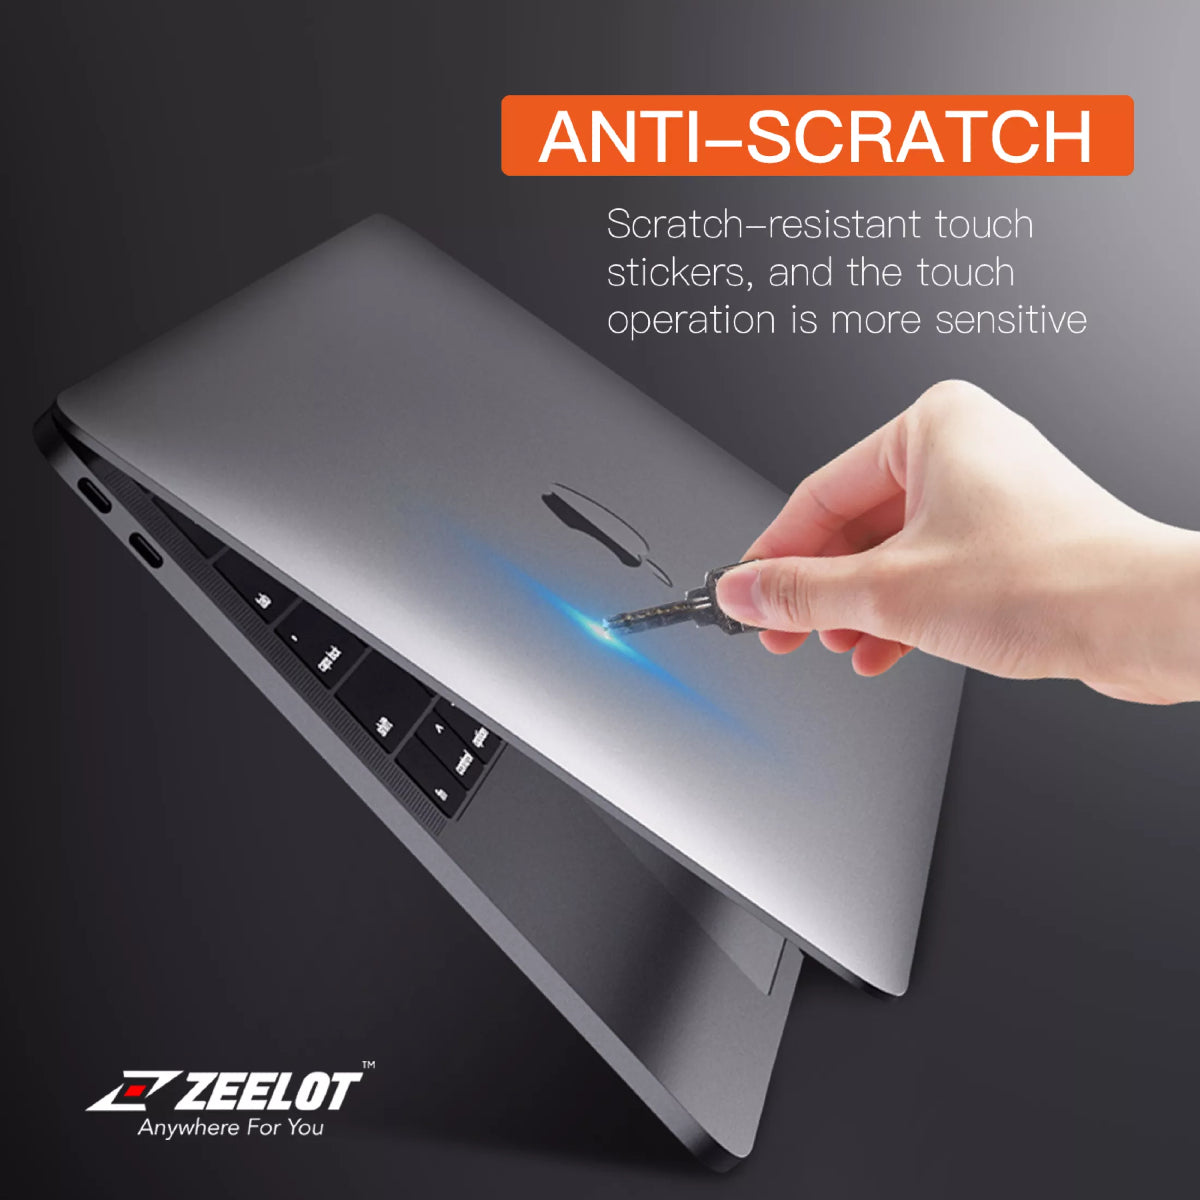 Shop and buy Zeelot 6-in-1 Full Body Guard Protection Film for MacBook Pro 16'' (2019) Anti-Scratch Ultra-Thin| Casefactorie® online with great deals and sales prices with fast and safe shipping. Casefactorie is the largest Singapore official authorised retailer for the largest collection of mobile premium accessories.